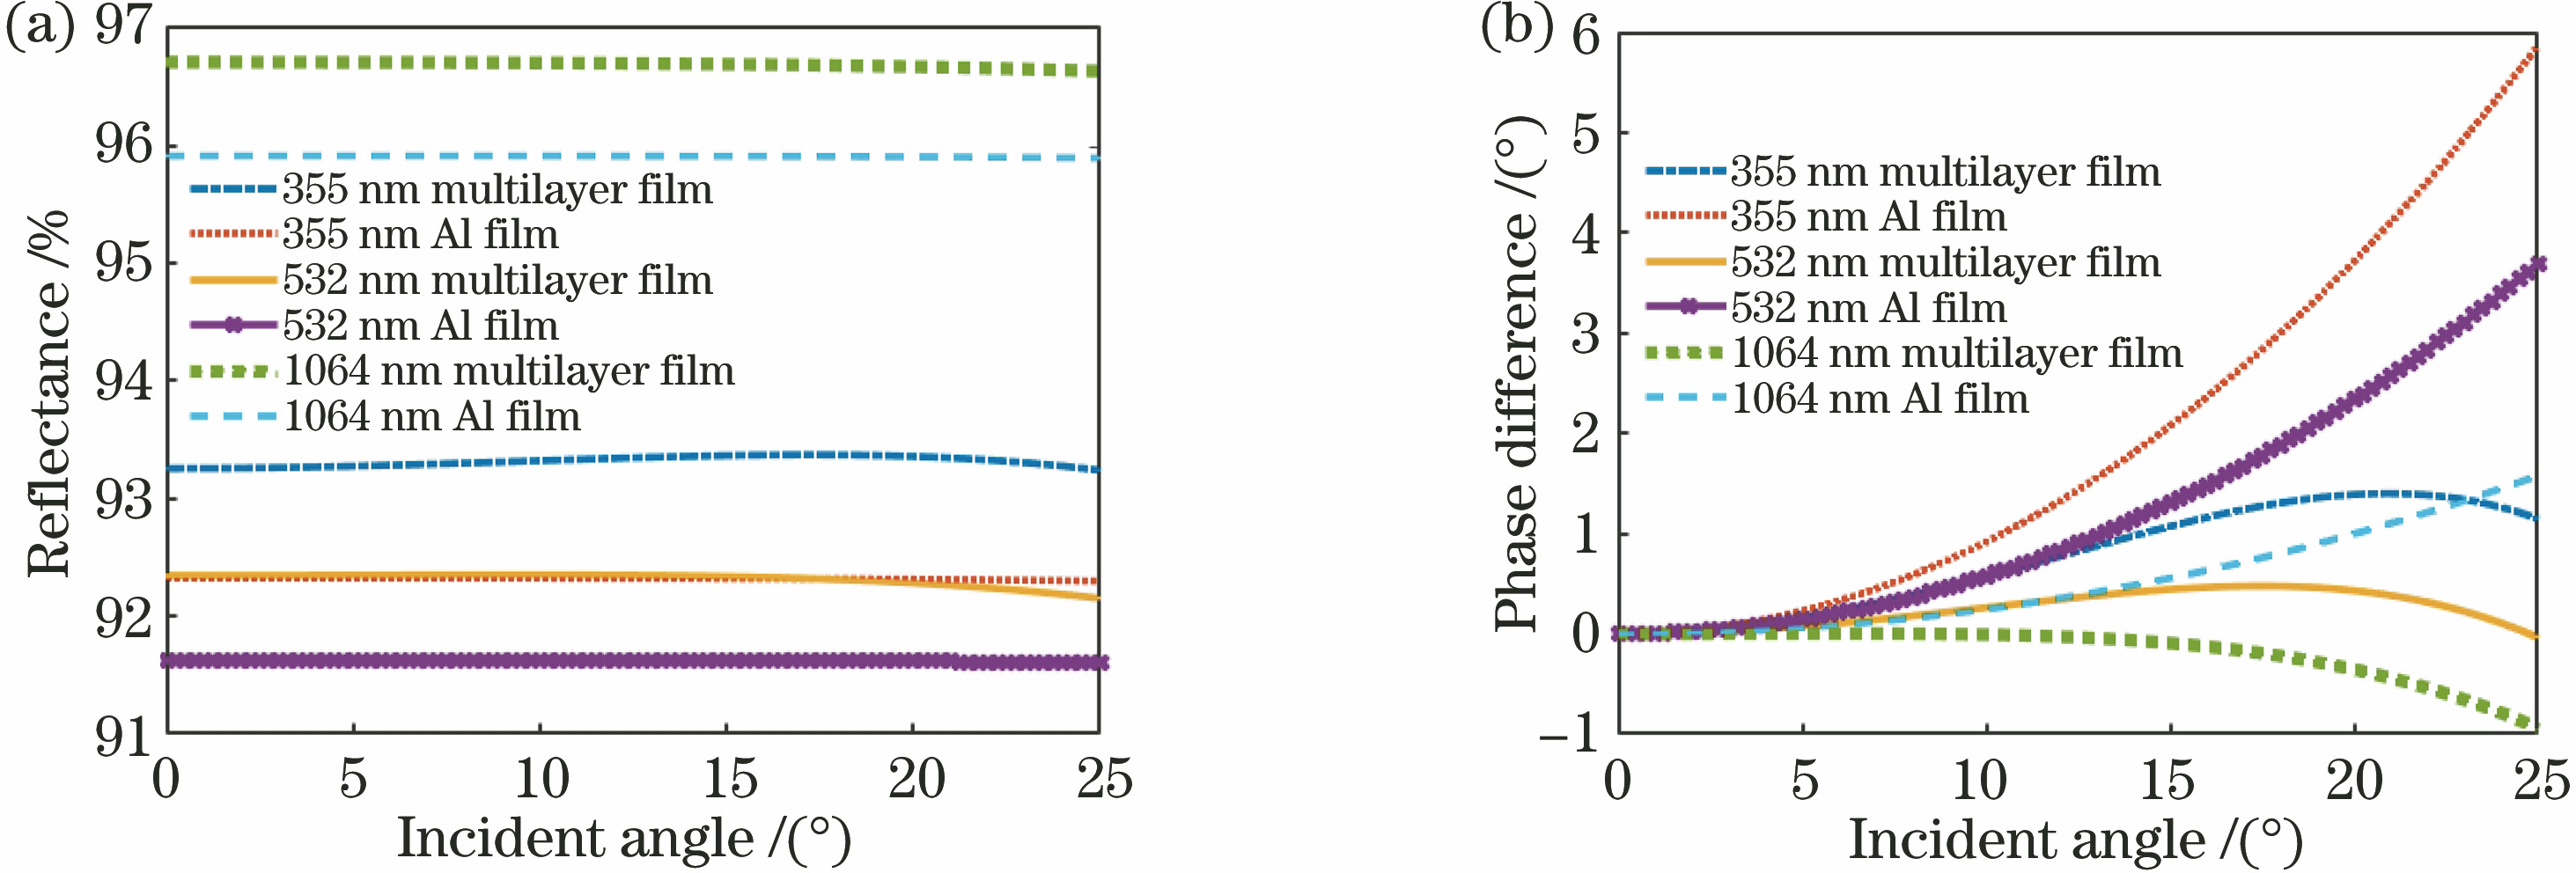 Optical properties of multilayer film and Al film. (a) Reflectance; (b) phase difference between s light and p light